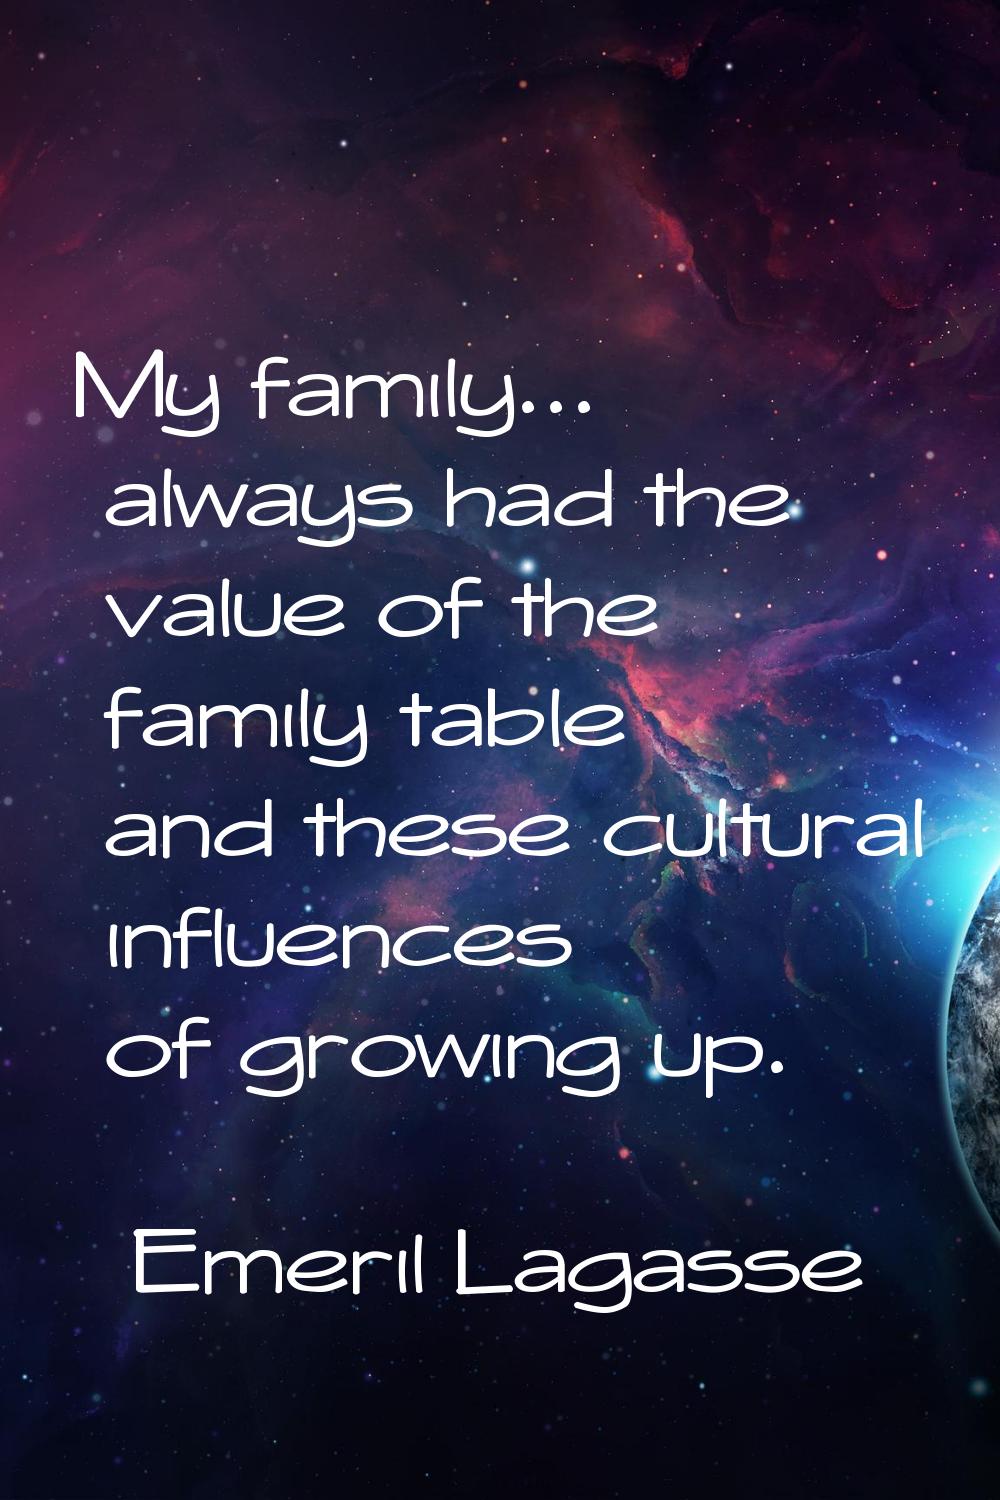 My family... always had the value of the family table and these cultural influences of growing up.